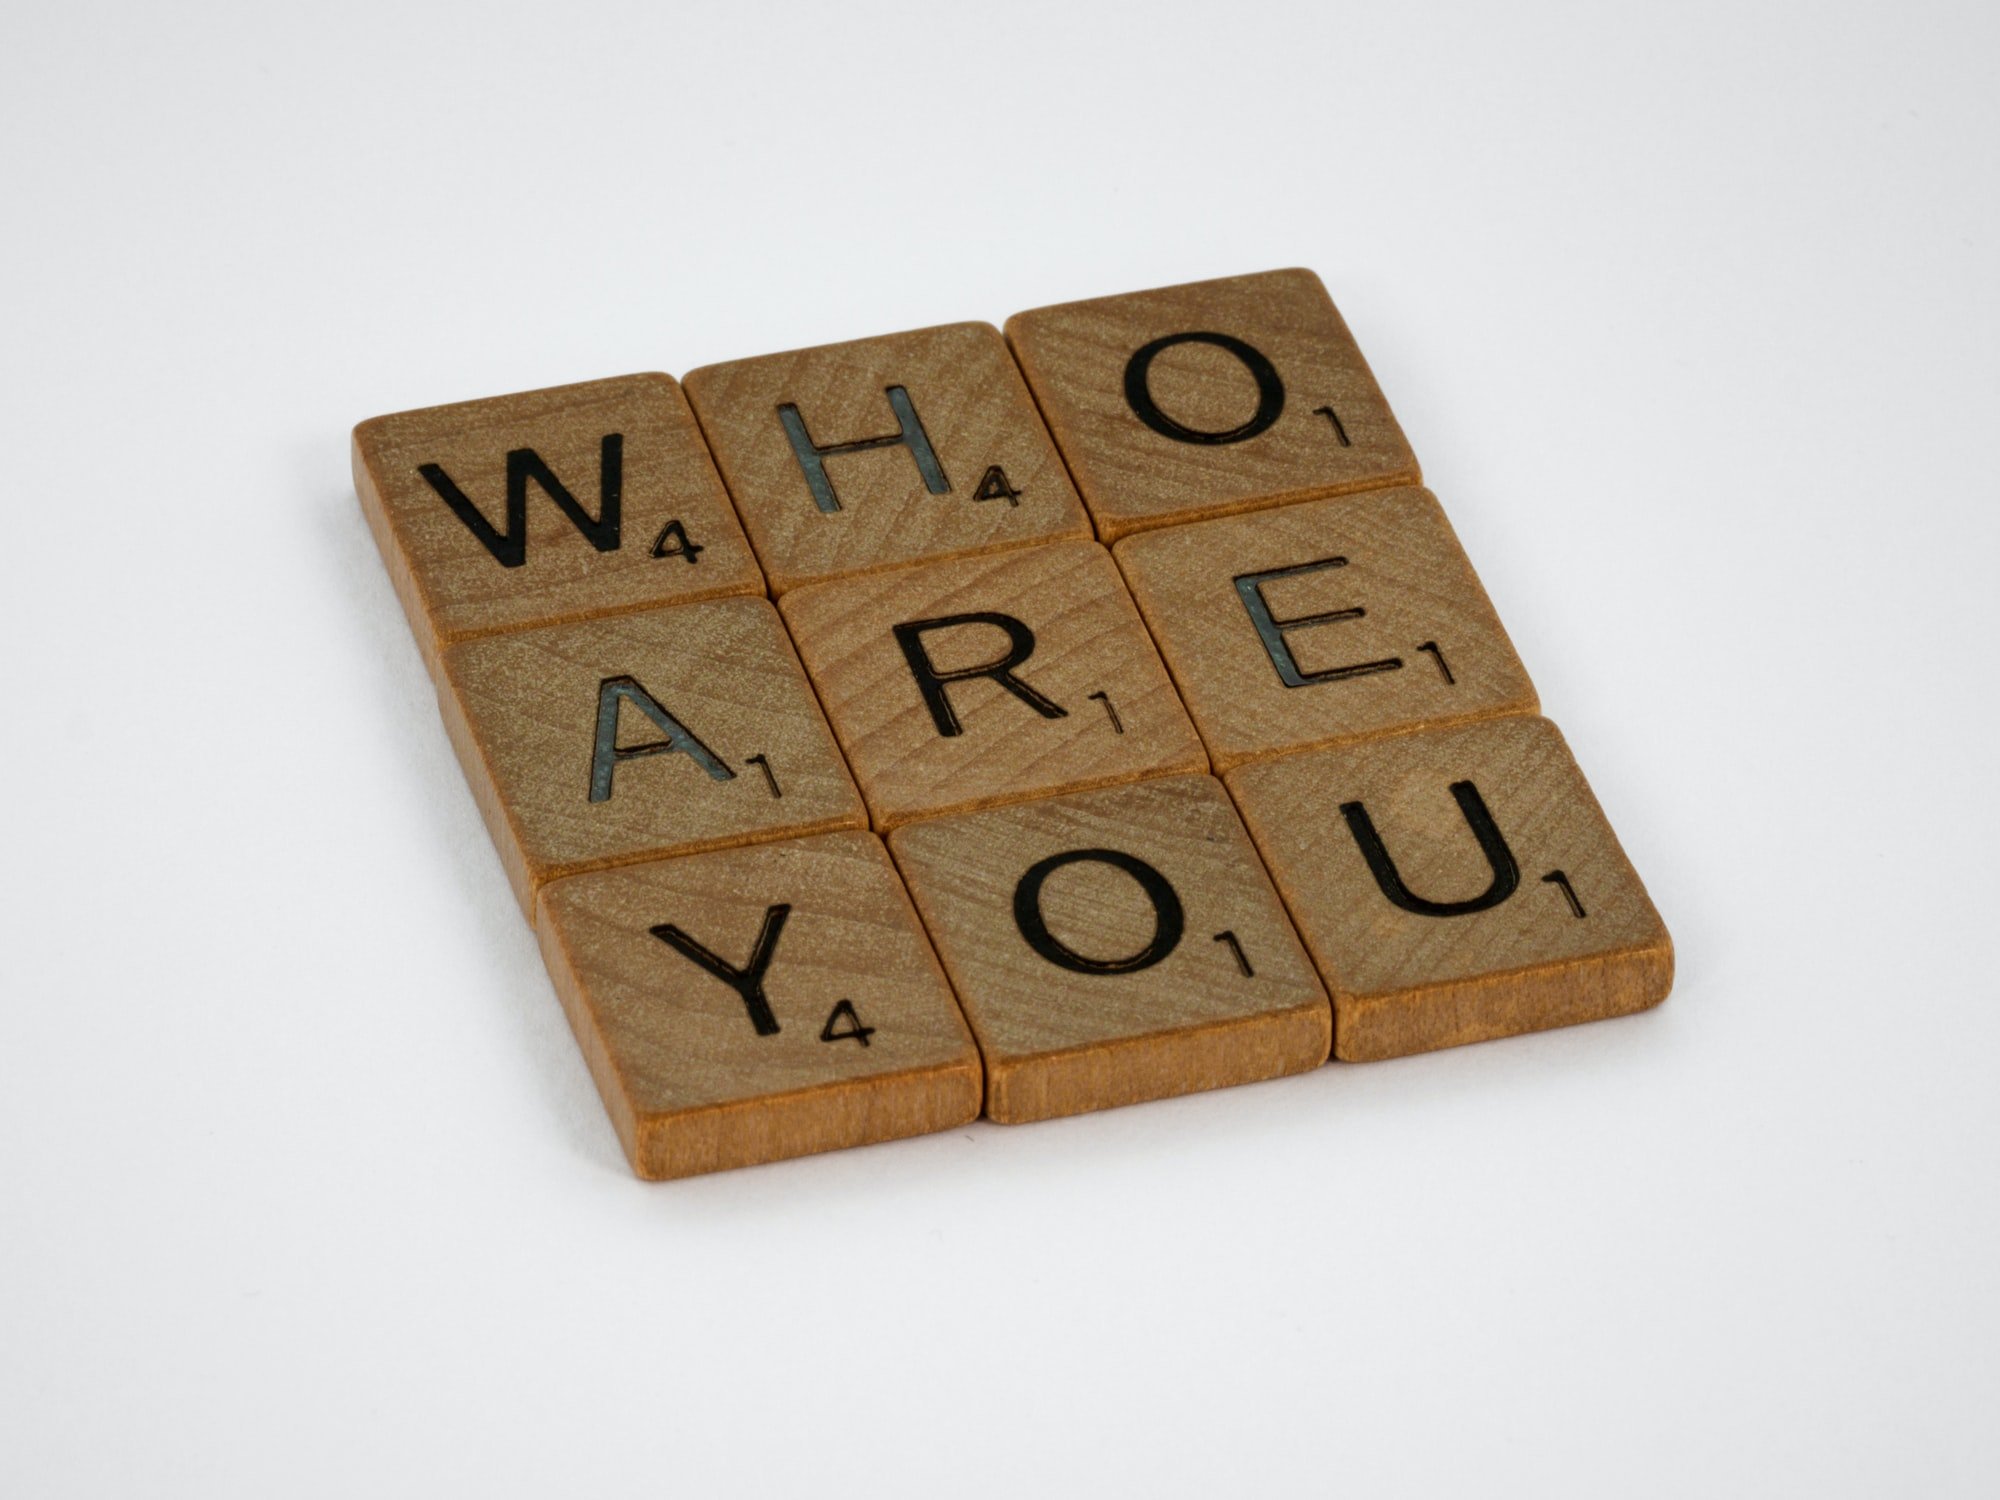 "Who Are You" spelled out in scrabble pieces